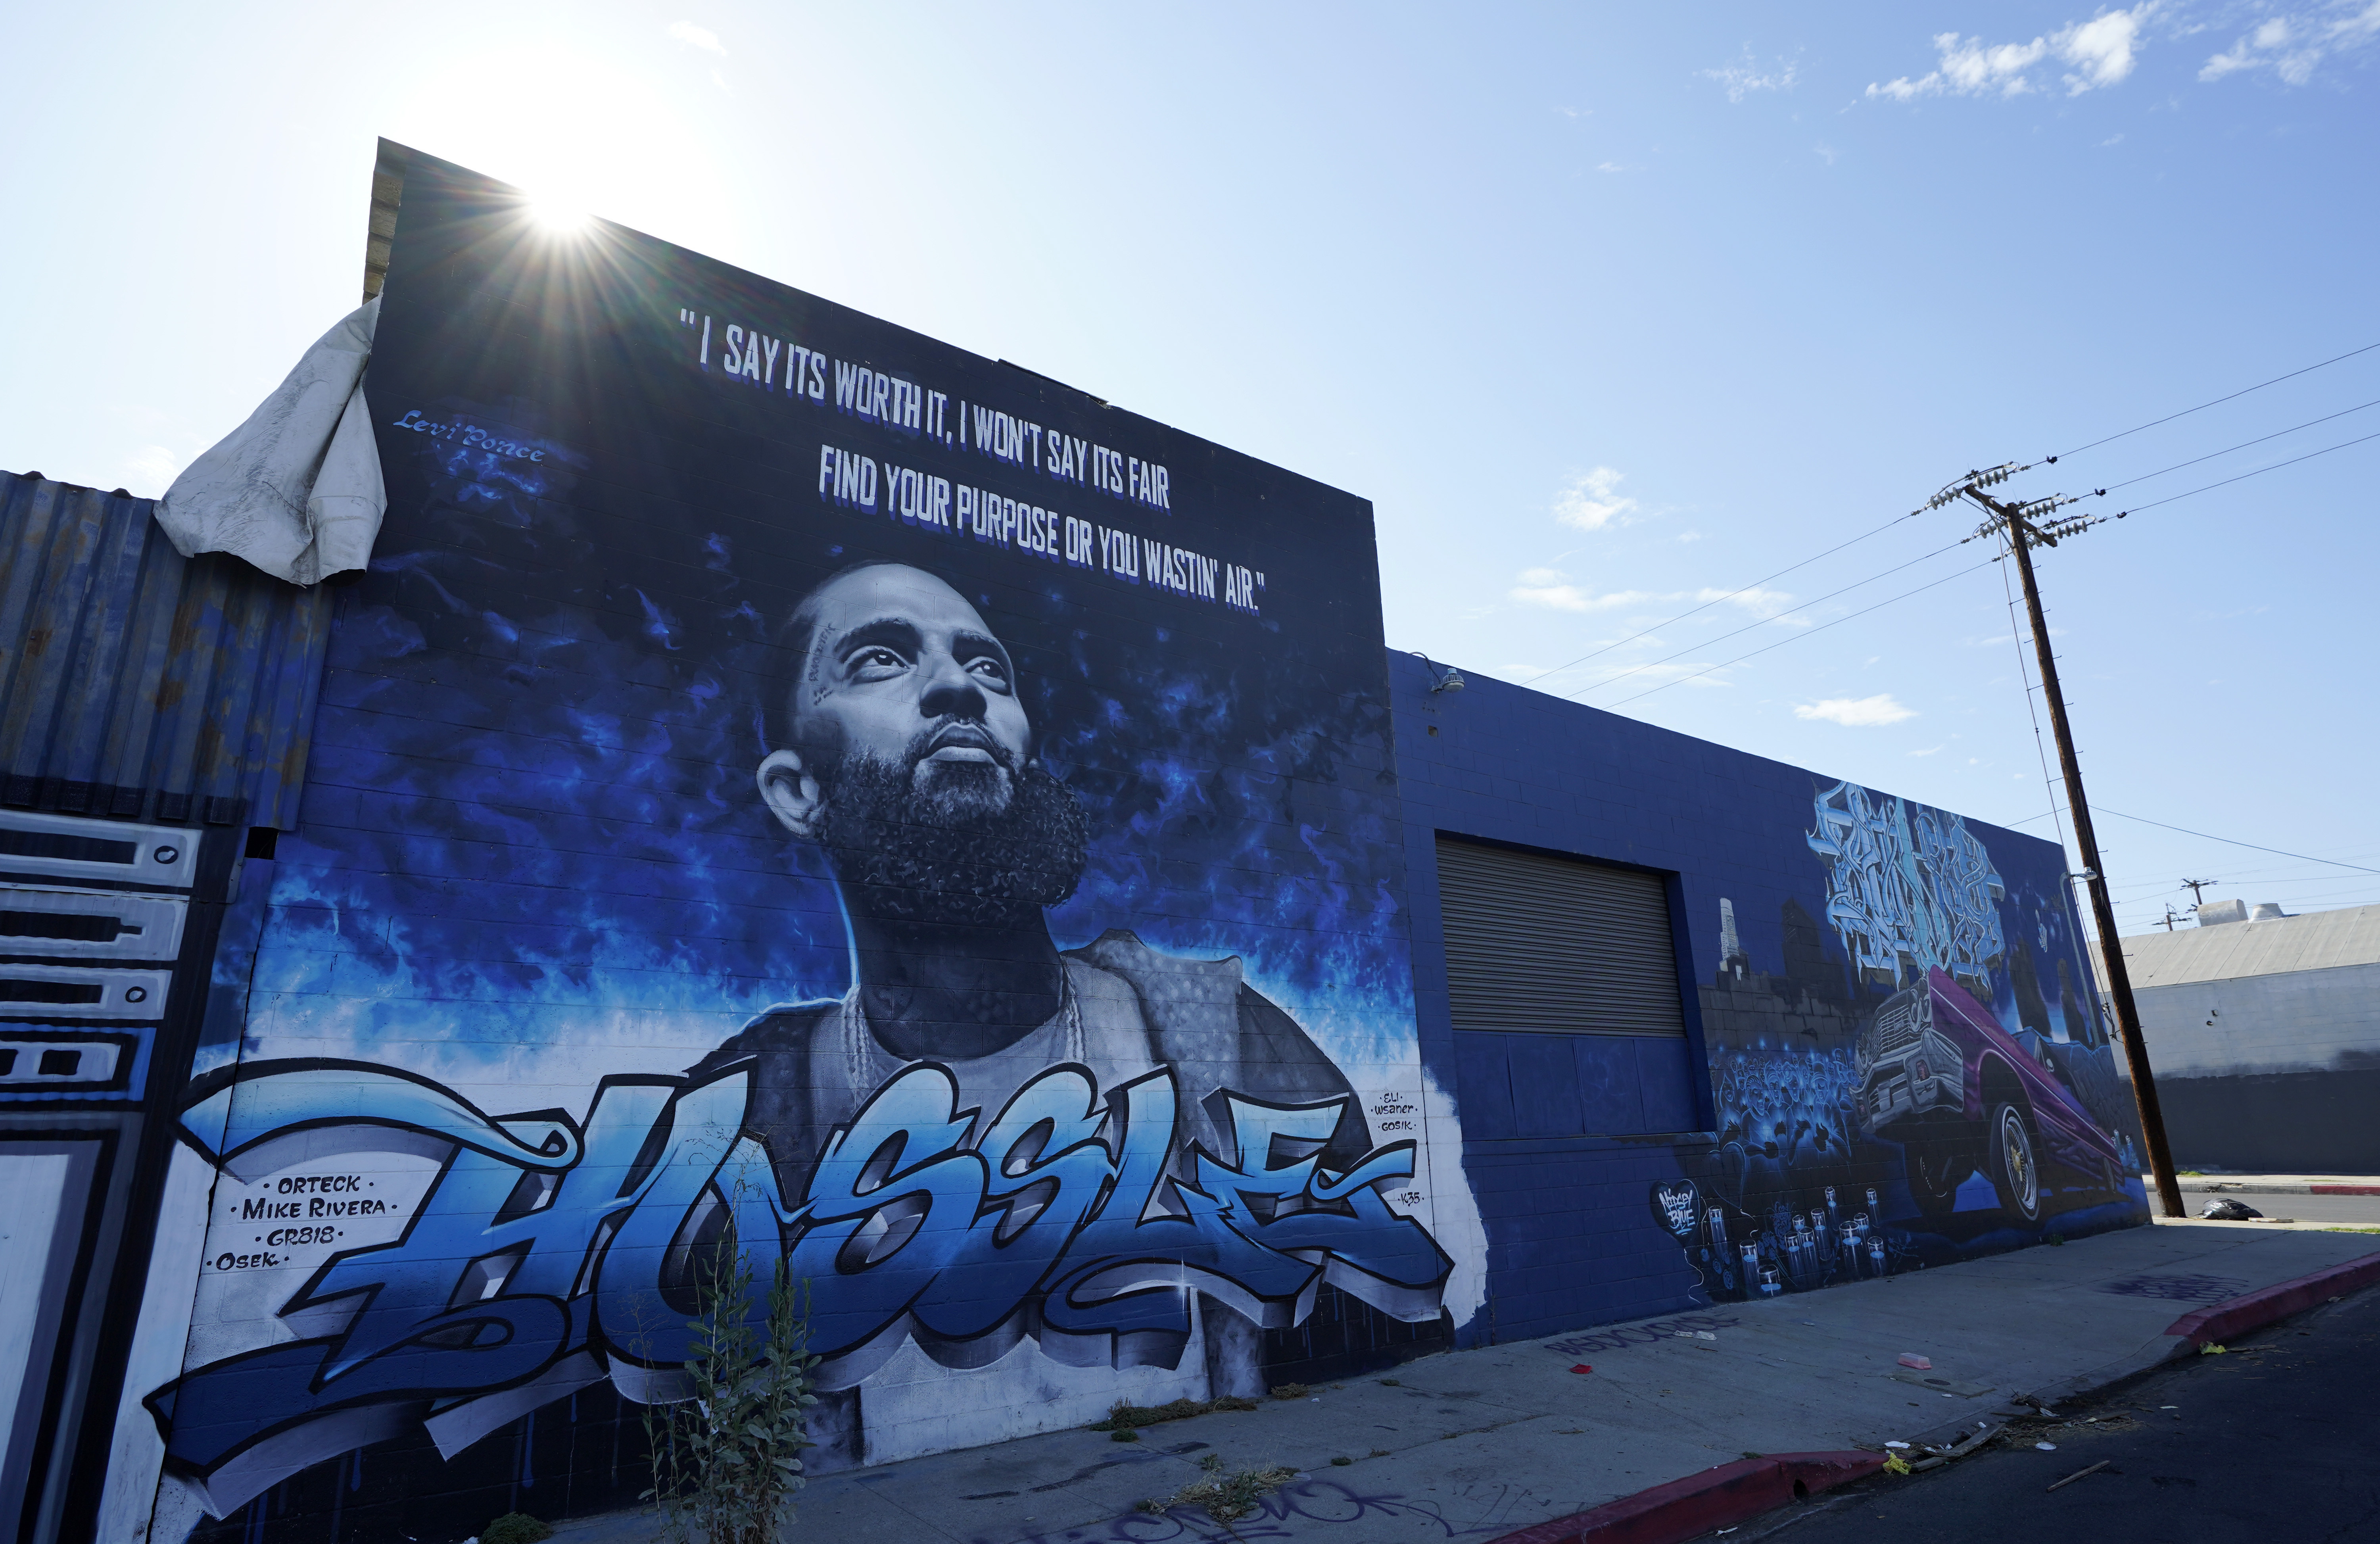 Nipsey Hussle art: More than 50 colorful murals in Los Angeles